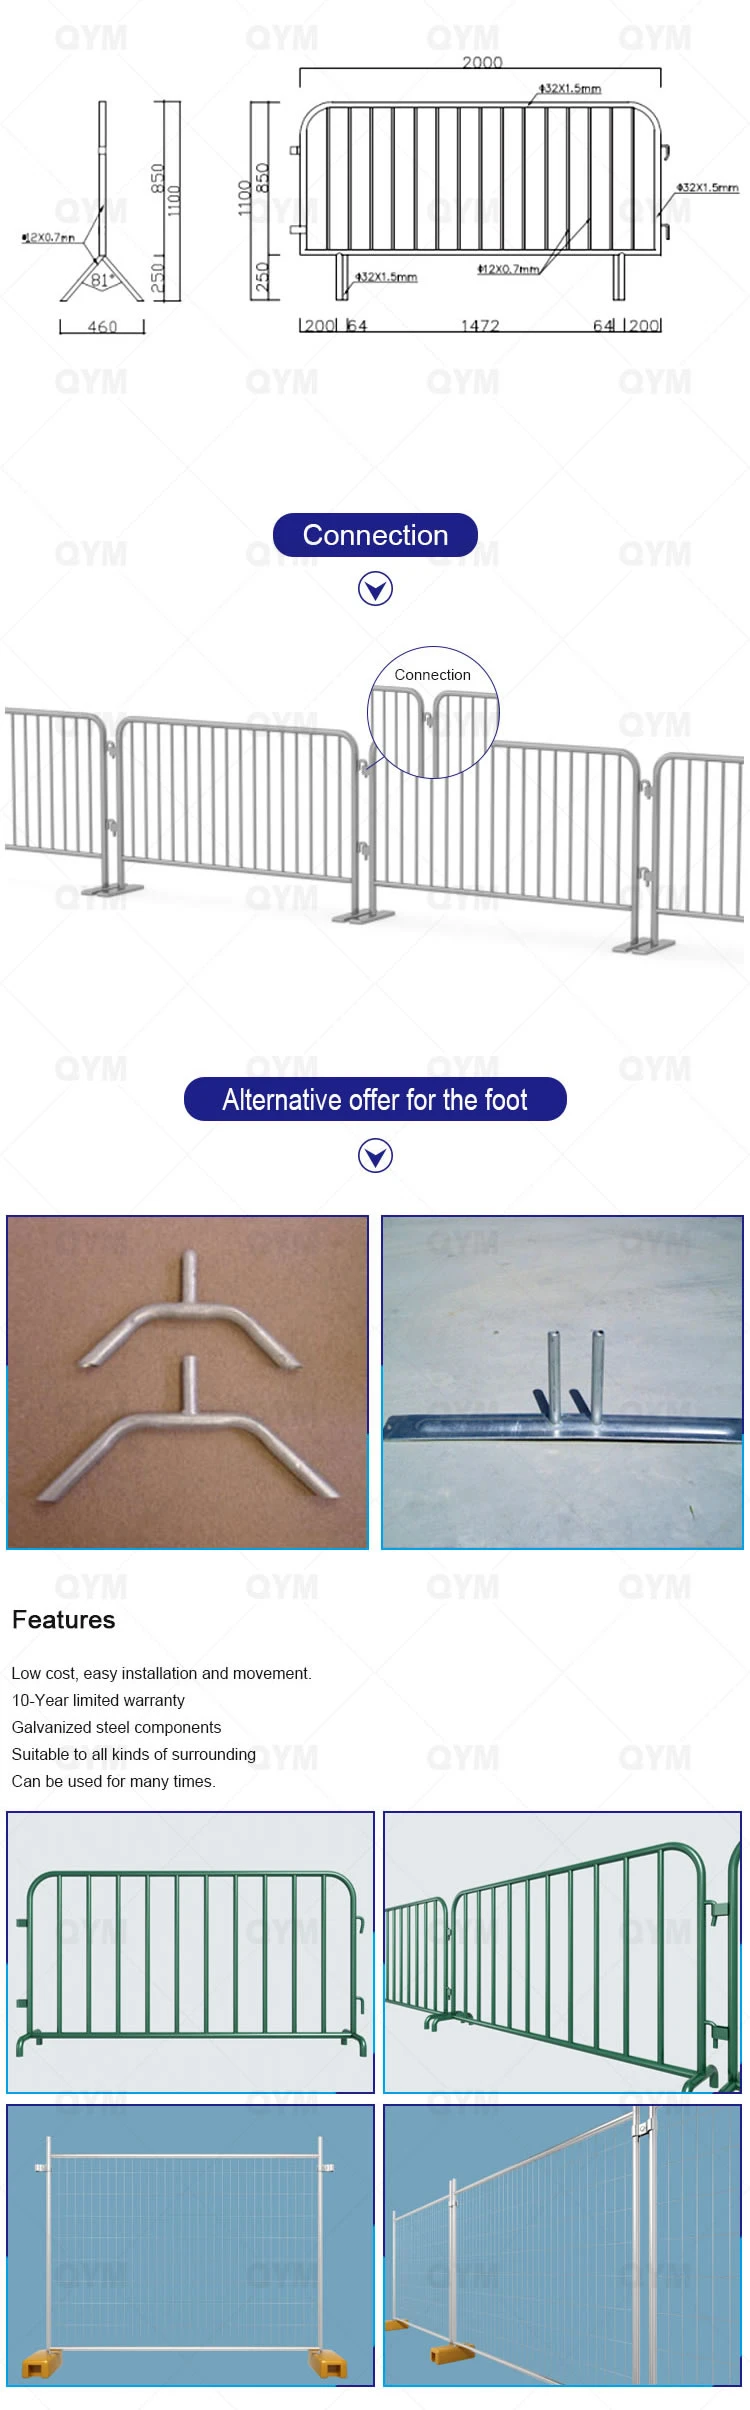 Temporary Swimming Pool Fence Galvanized Crowd Control Barrier Fence